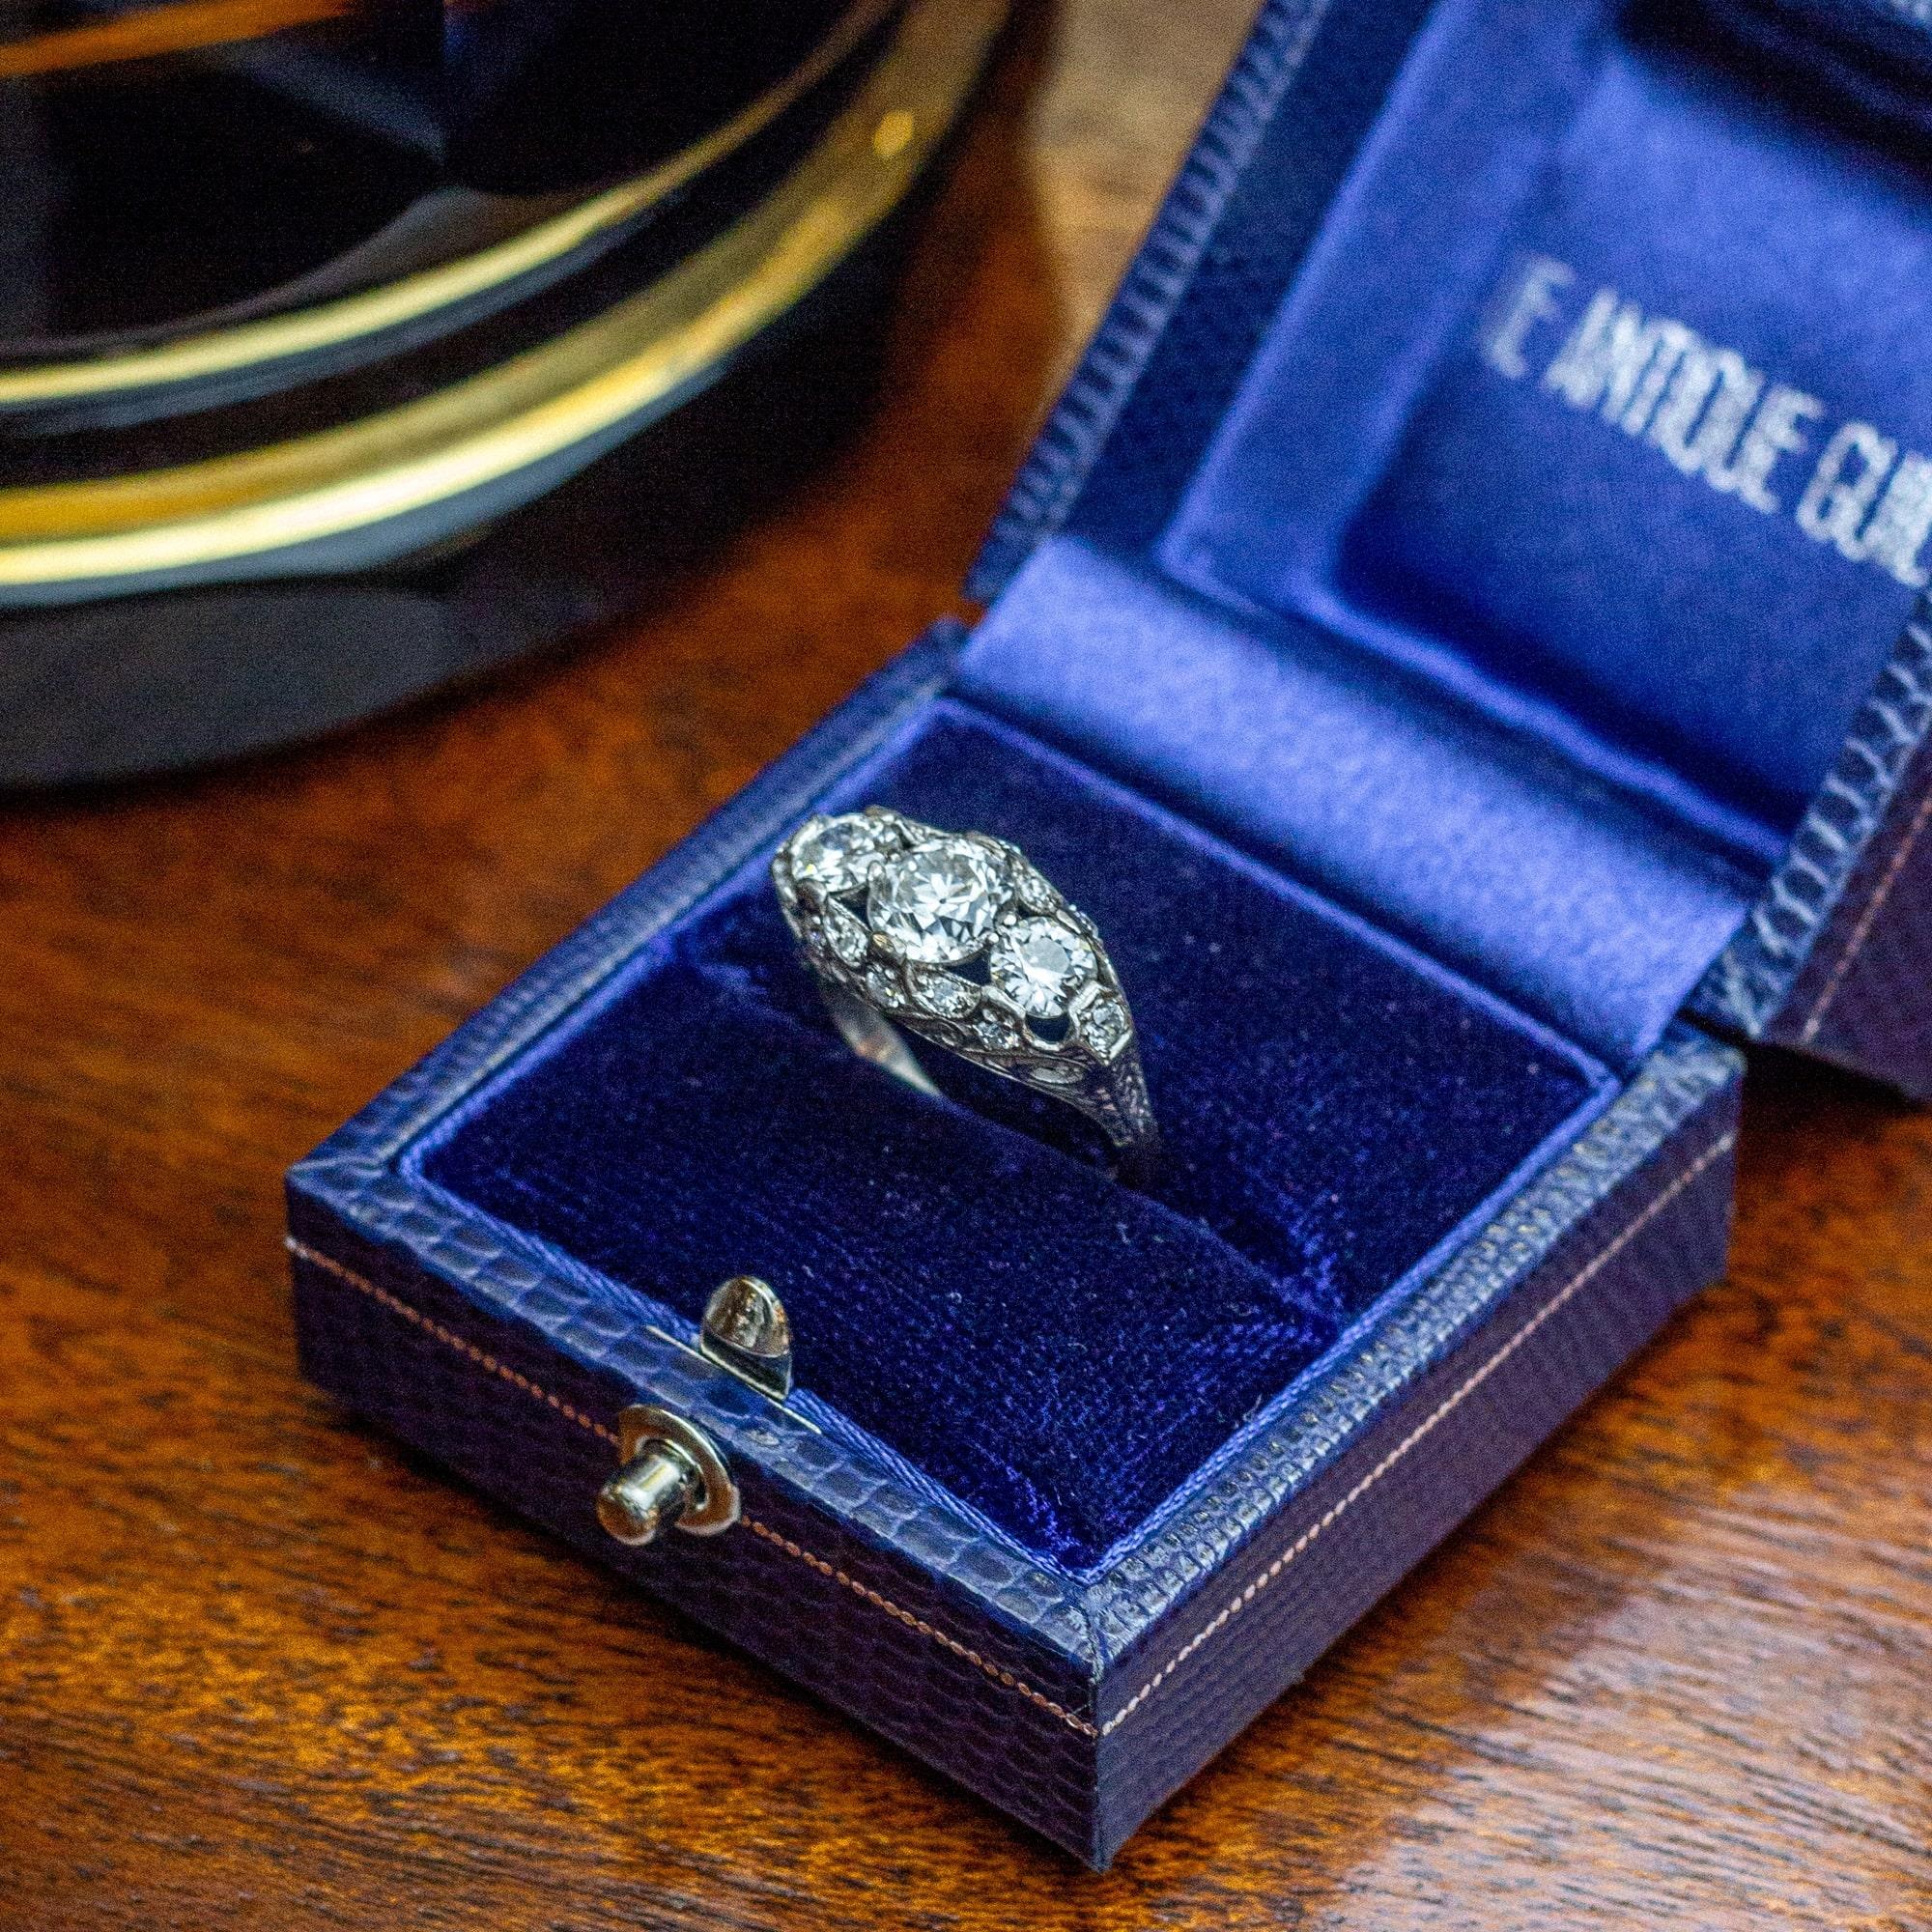 An exceptional Art Deco, platinum and white gold ring set with diamonds. This ring is set with fine quality 'Old European Cut' diamonds which are placed in a beautifully engraved and scalloped gallery. The central diamond is of G colour and VS2